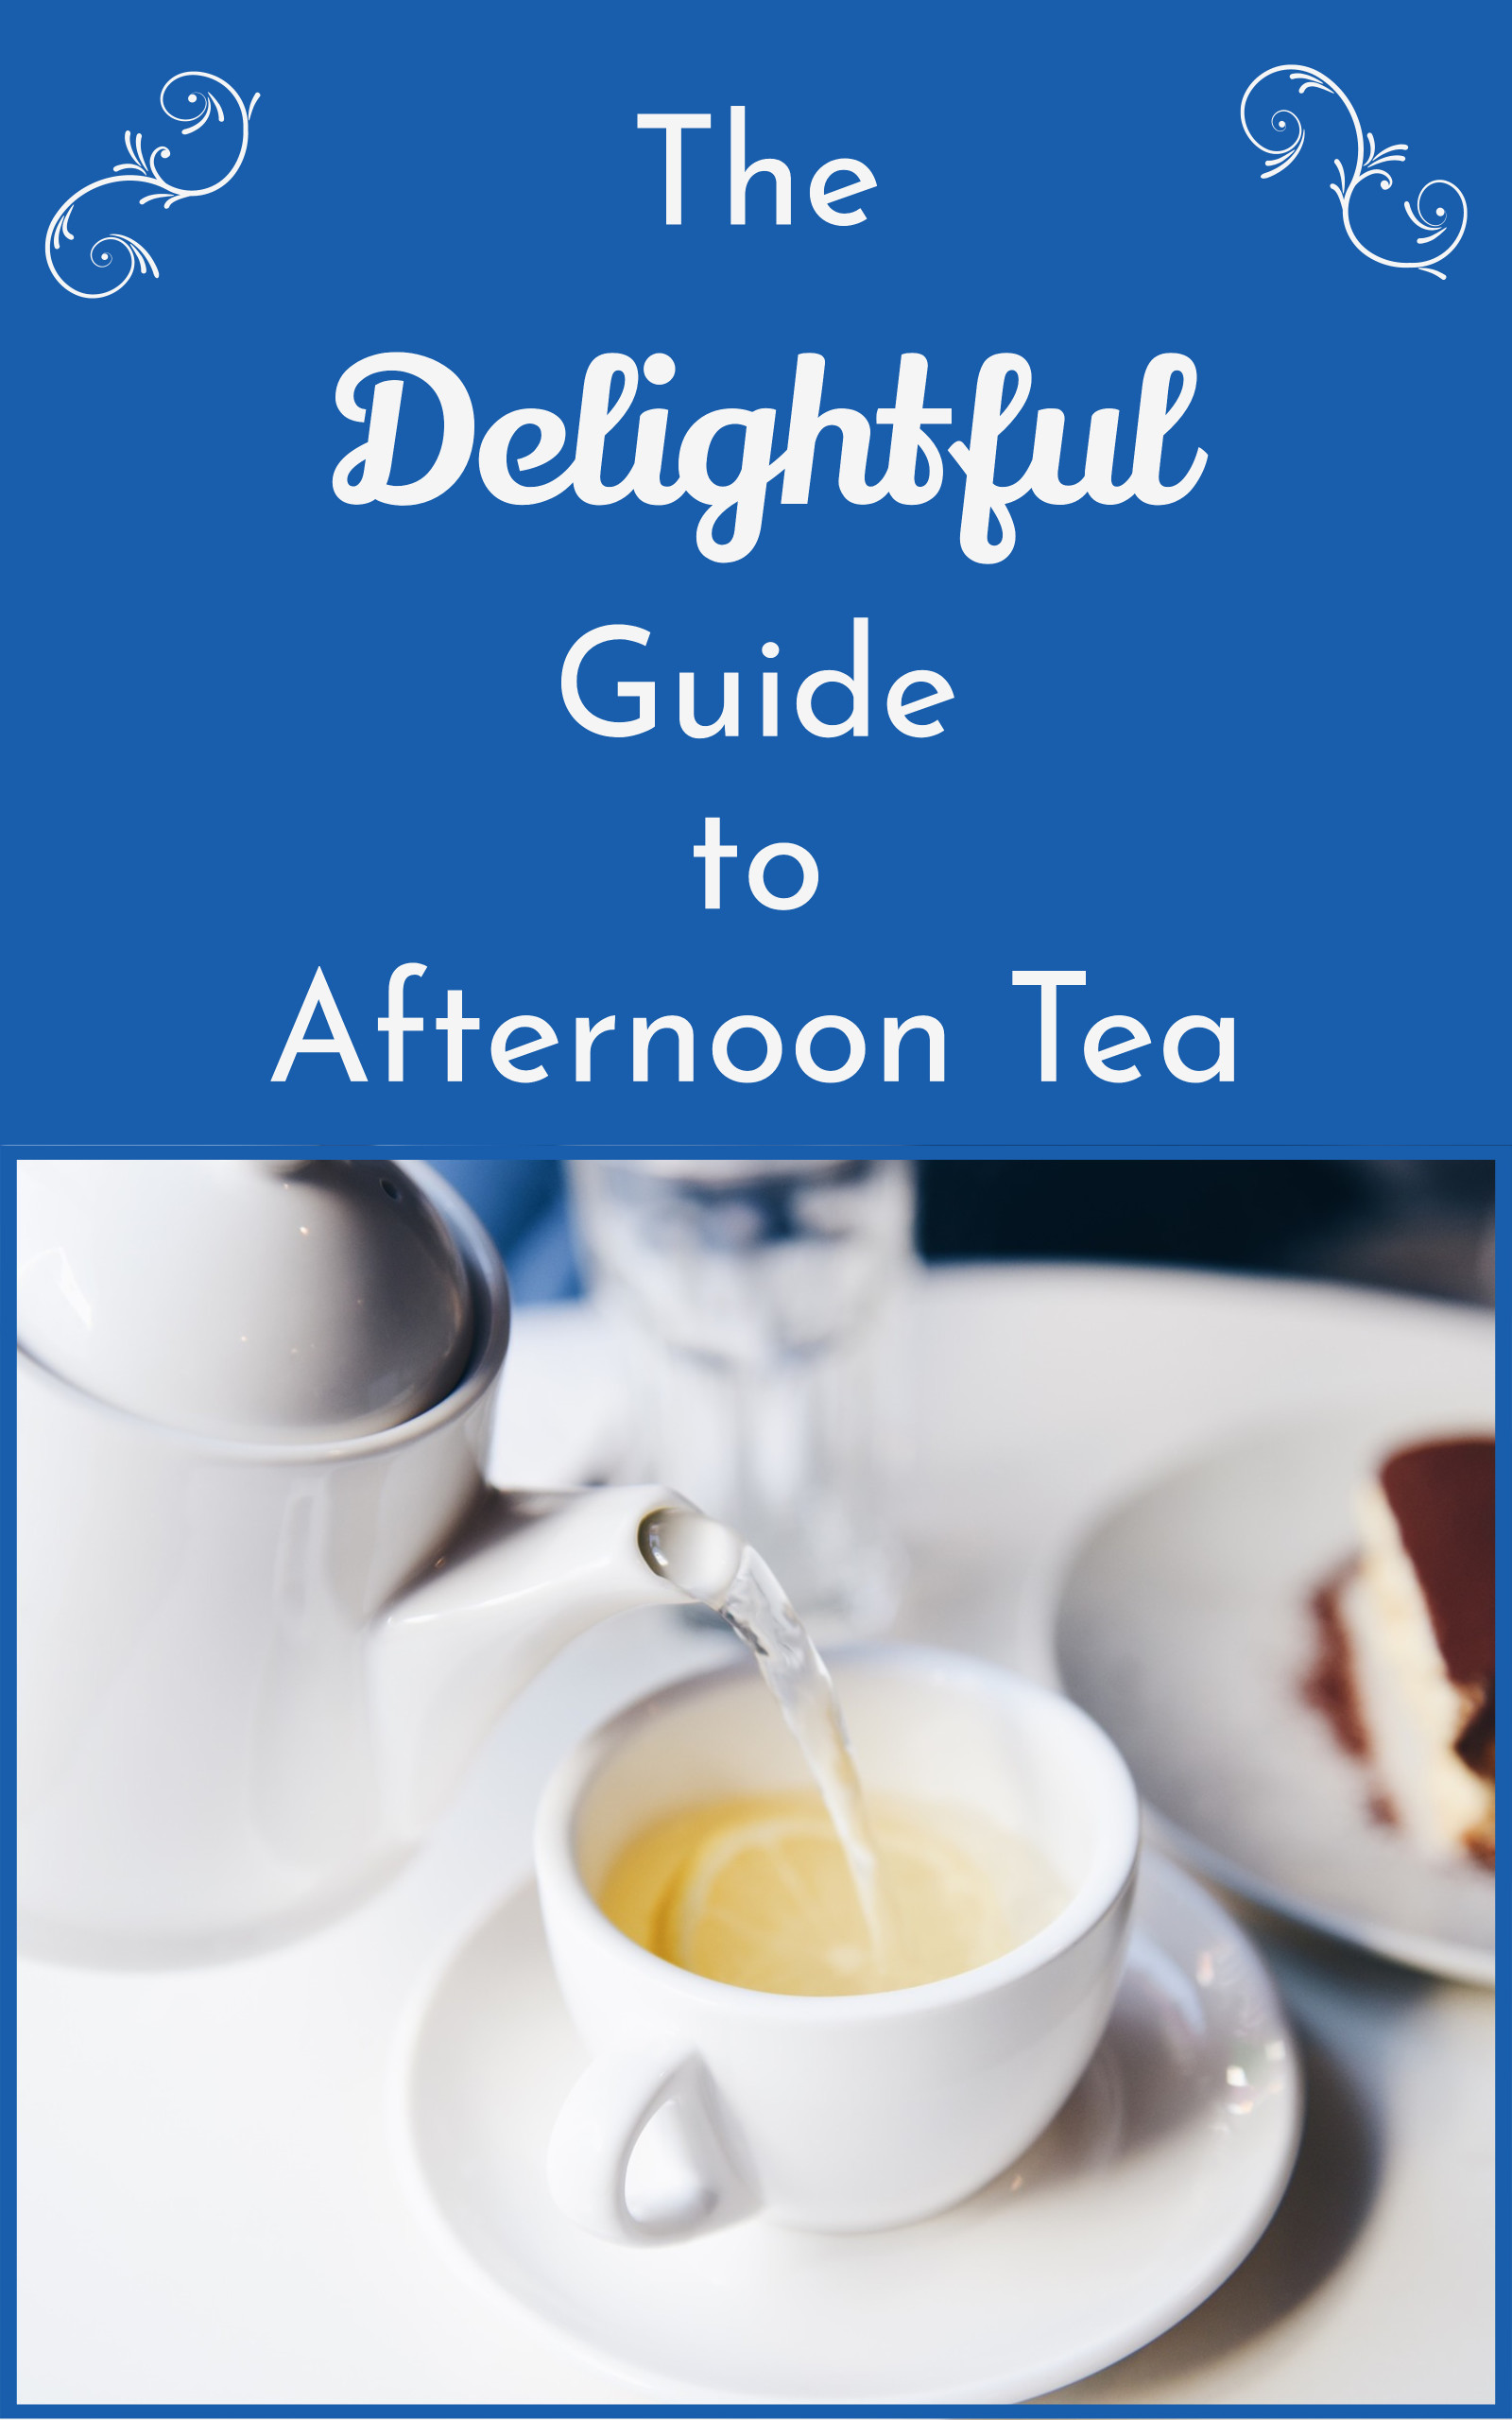 Guide to afternoon tea